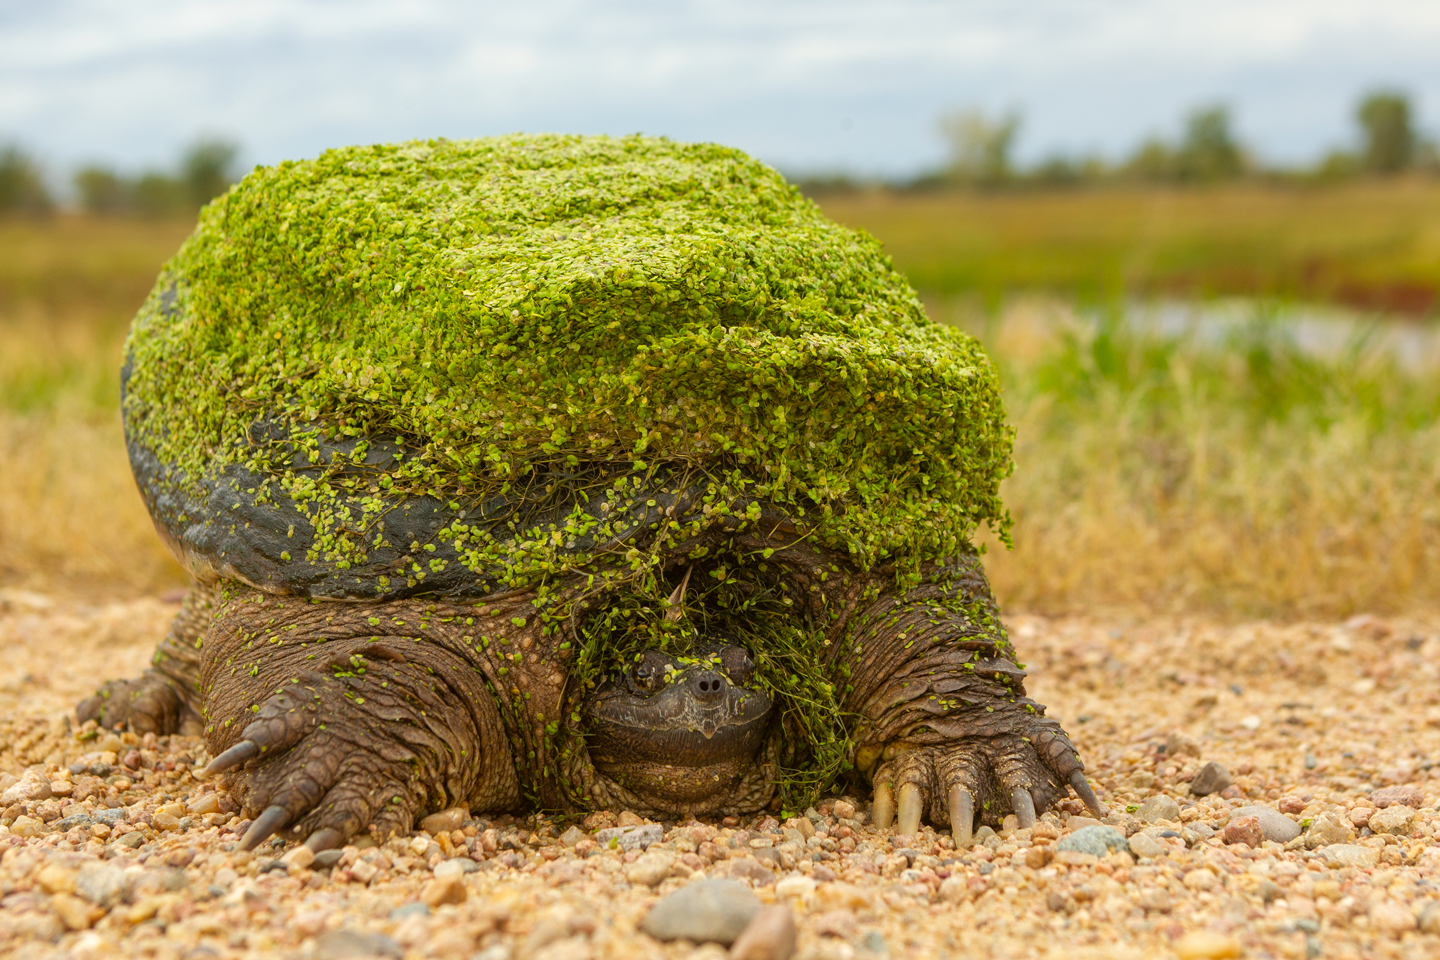 snapping turtle with water plants stuck to back